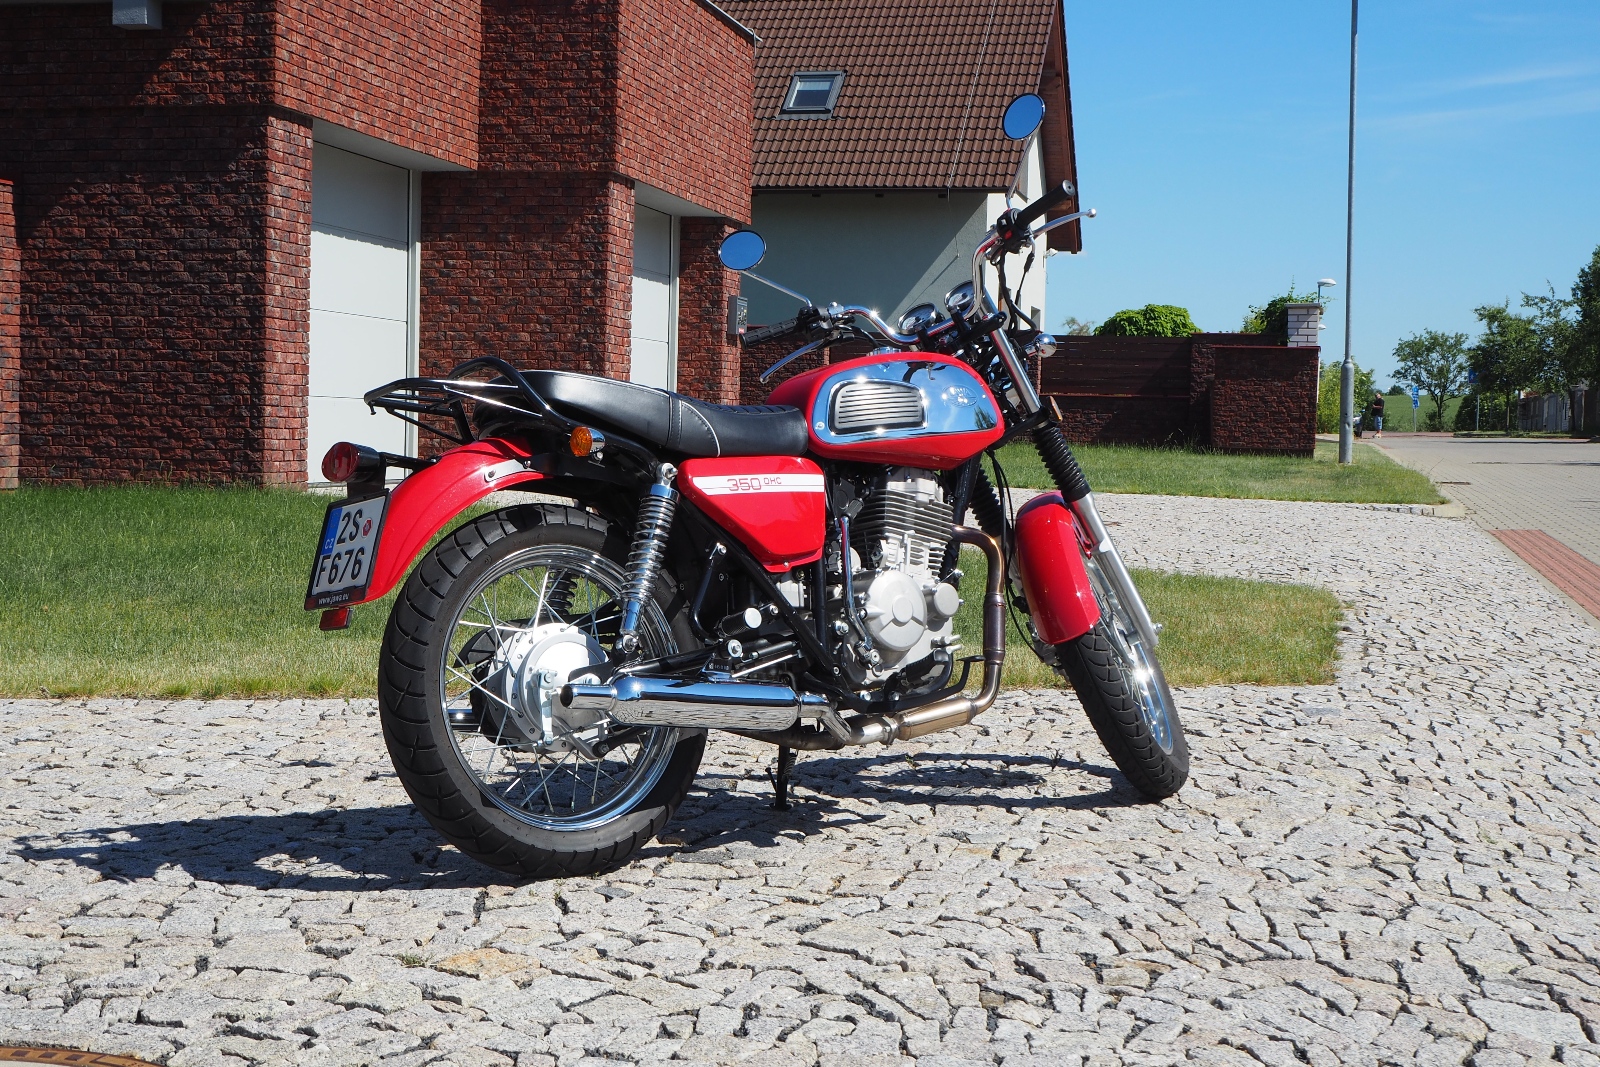 Czech wonder Jawa 350 OHC - In 15 Live Images